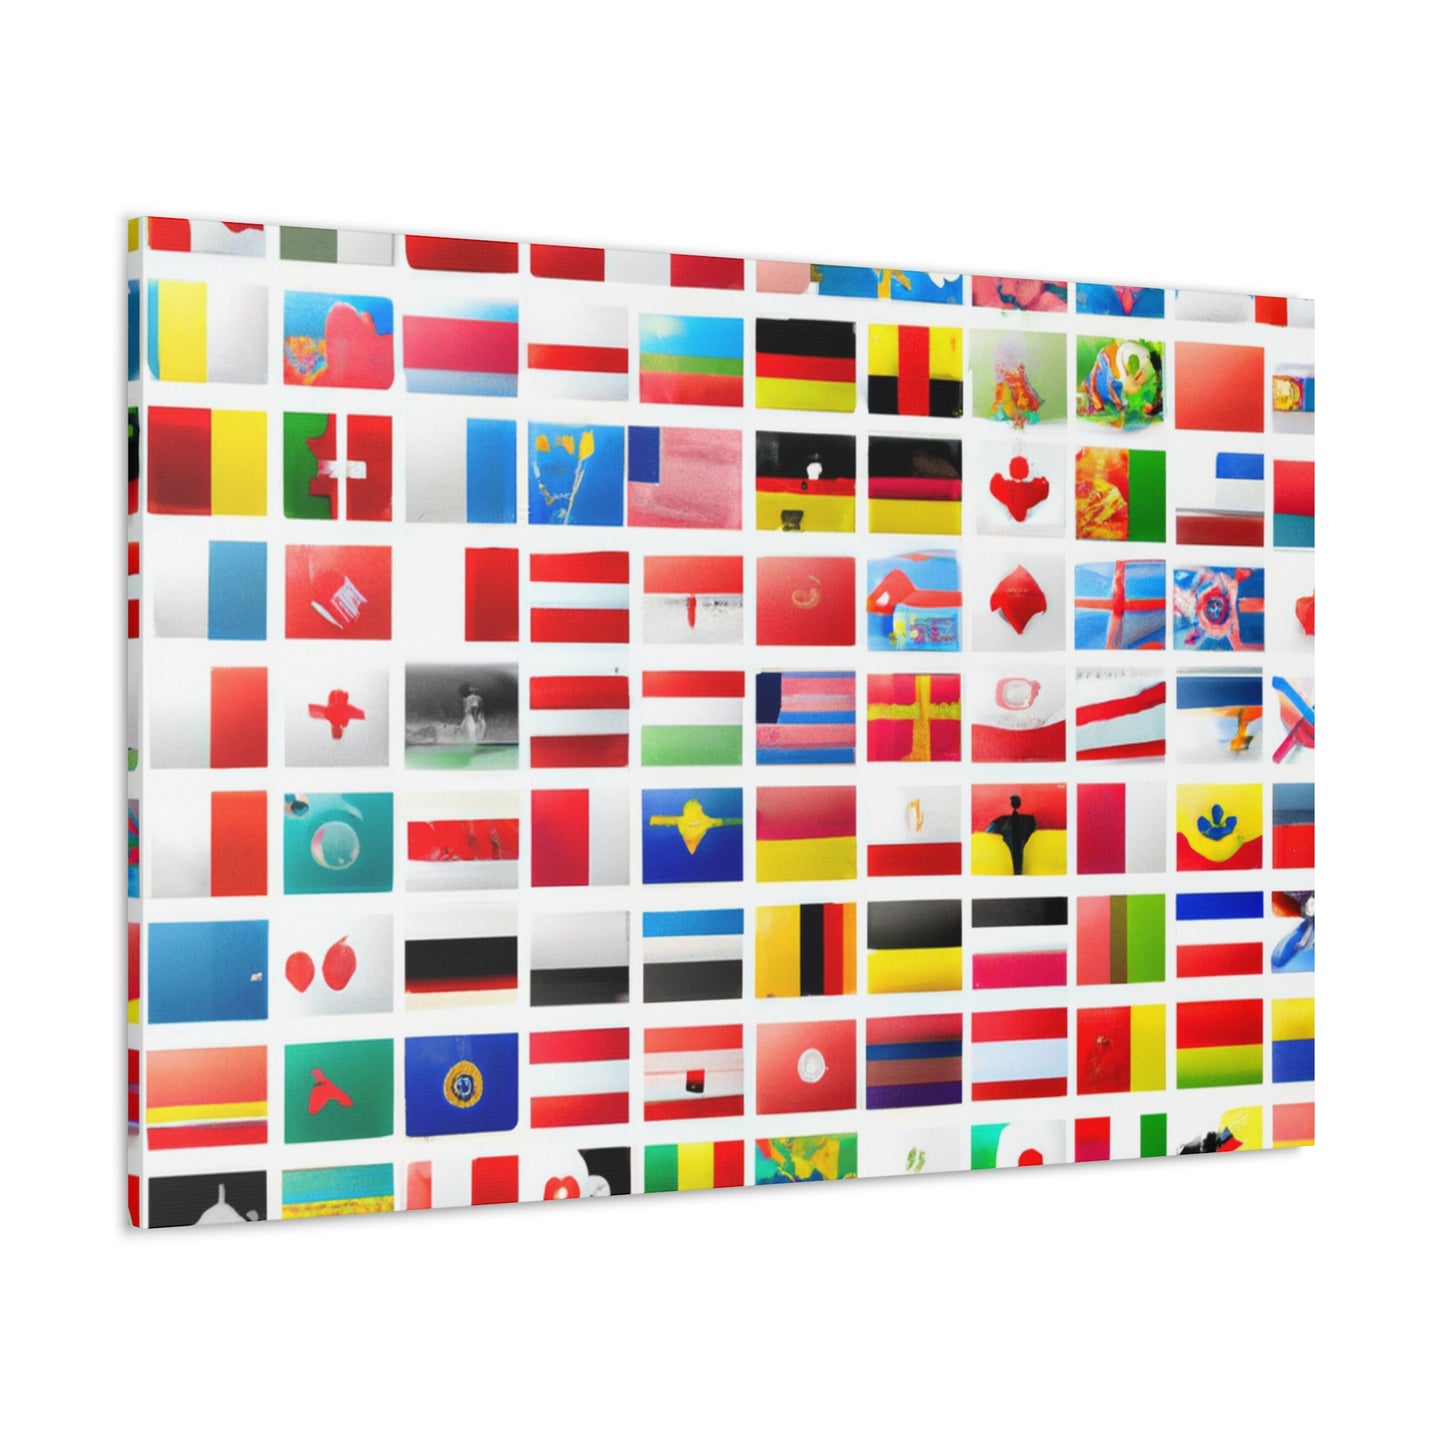 William G. Spear (1845-1929) - Flags Of The World Canvas Wall Art